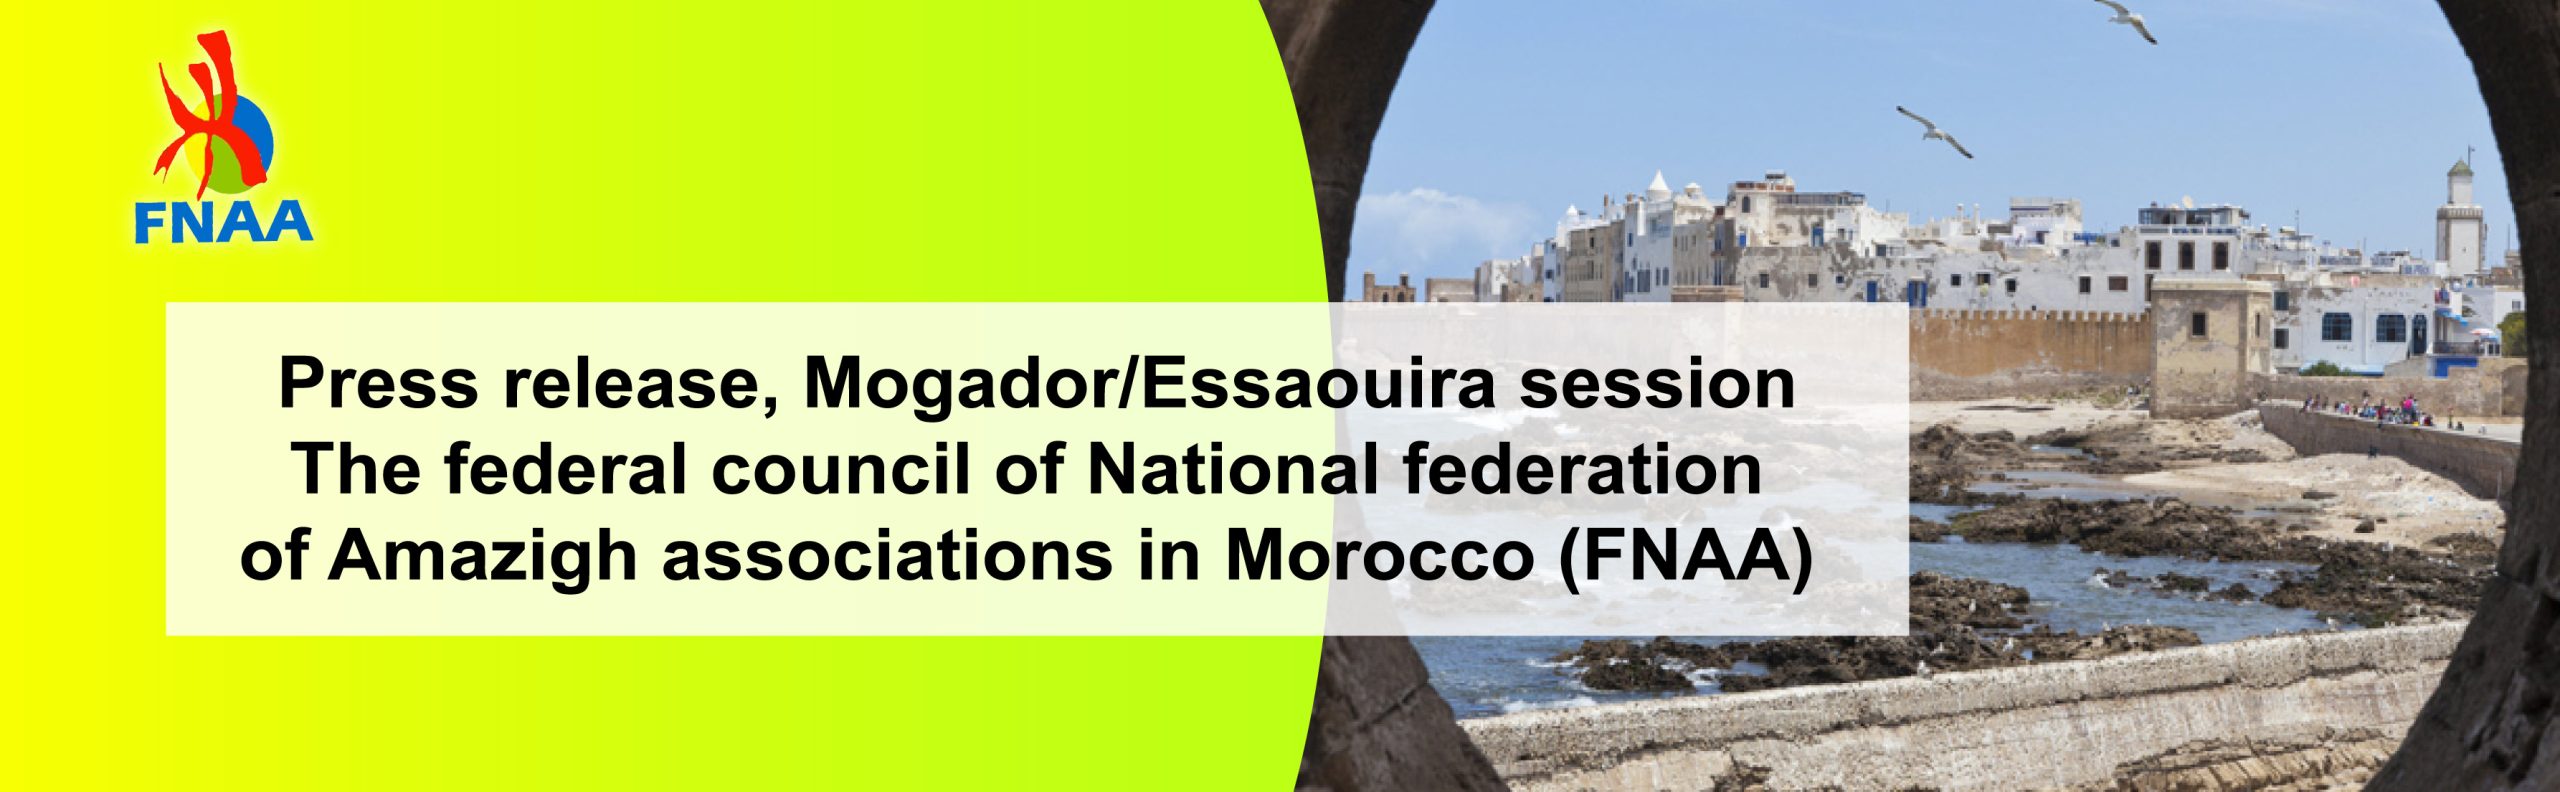 Press release, Mogador/Essaouira session The federal council of National federation of Amazigh associations in Morocco (FNAA)